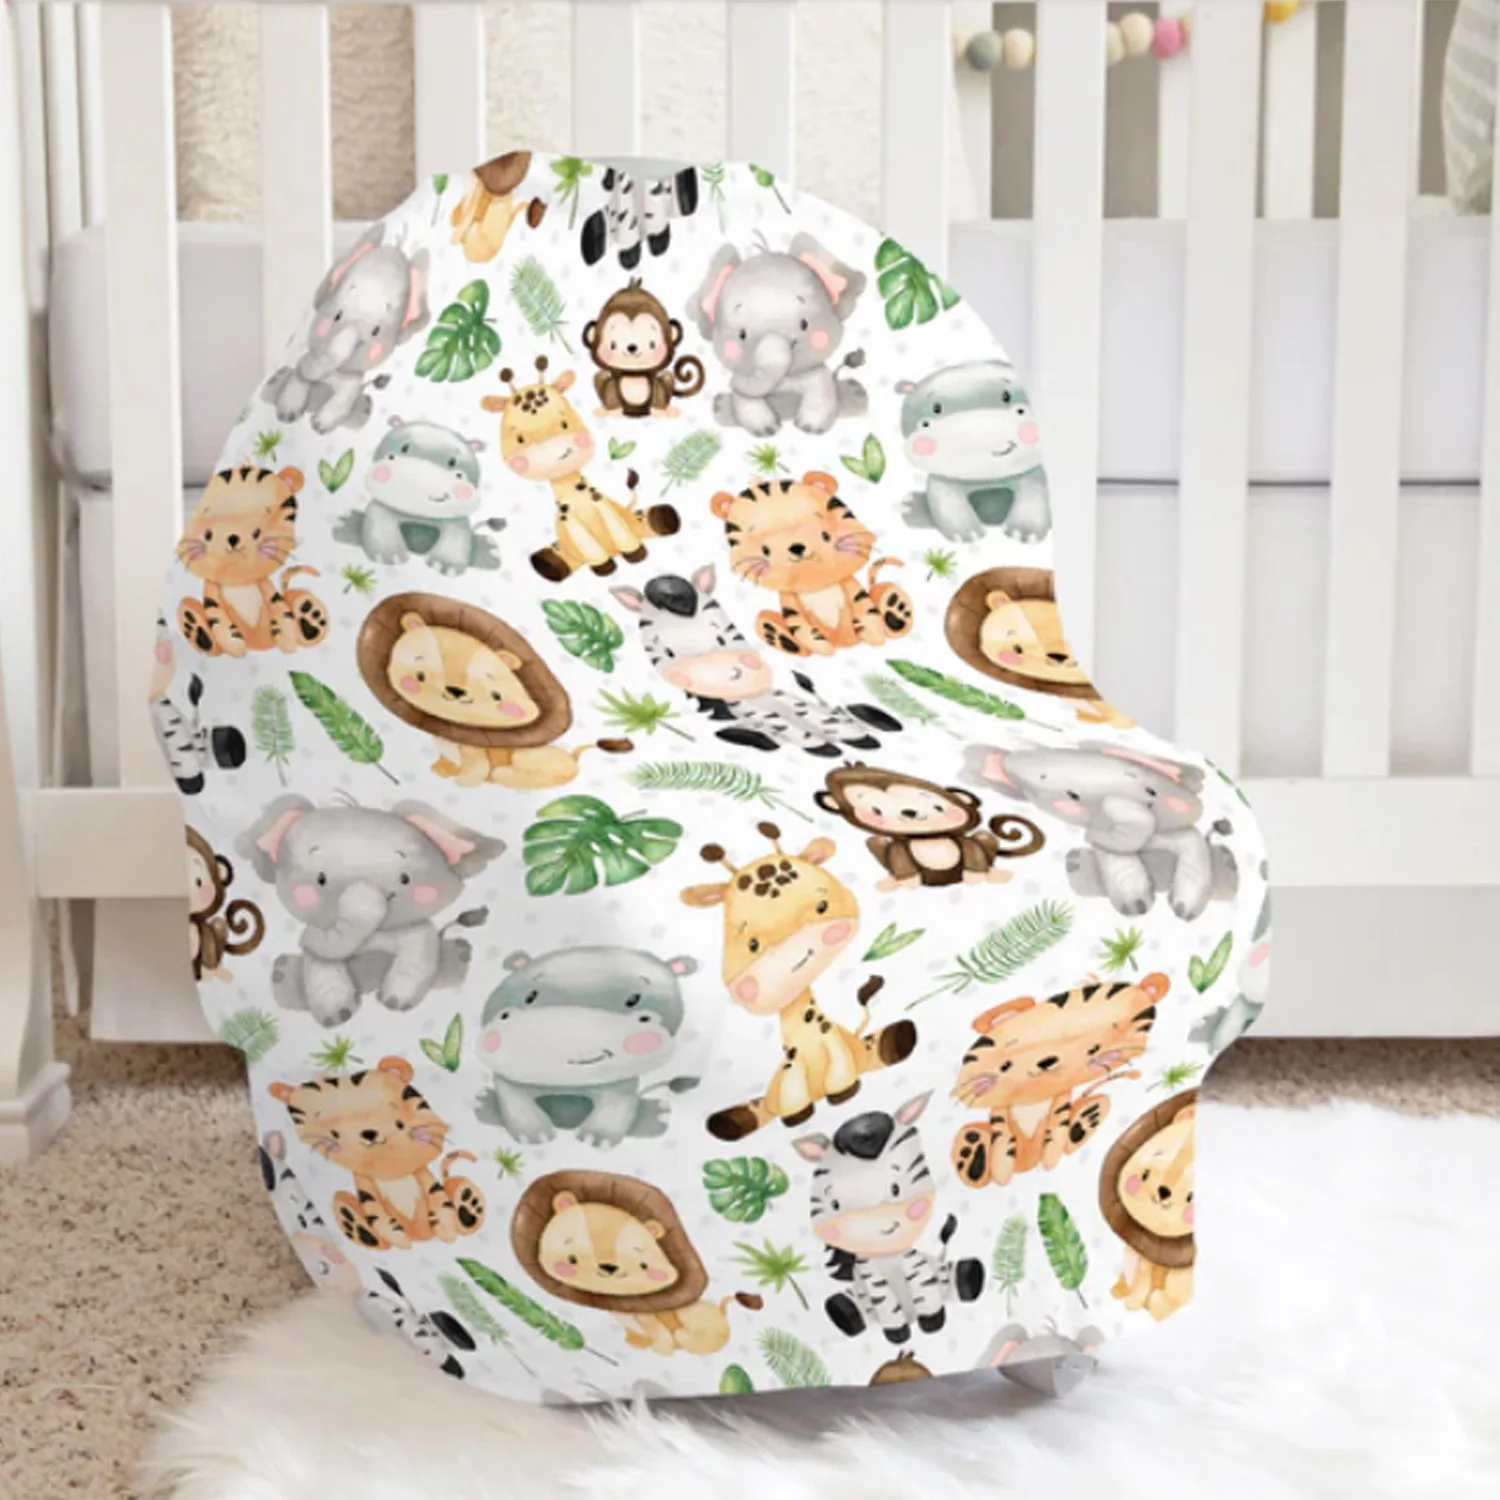 LVYZIHO Animals Car seat Cover, Jungle Nursing Cover, Personalized Baby Carseat Cover